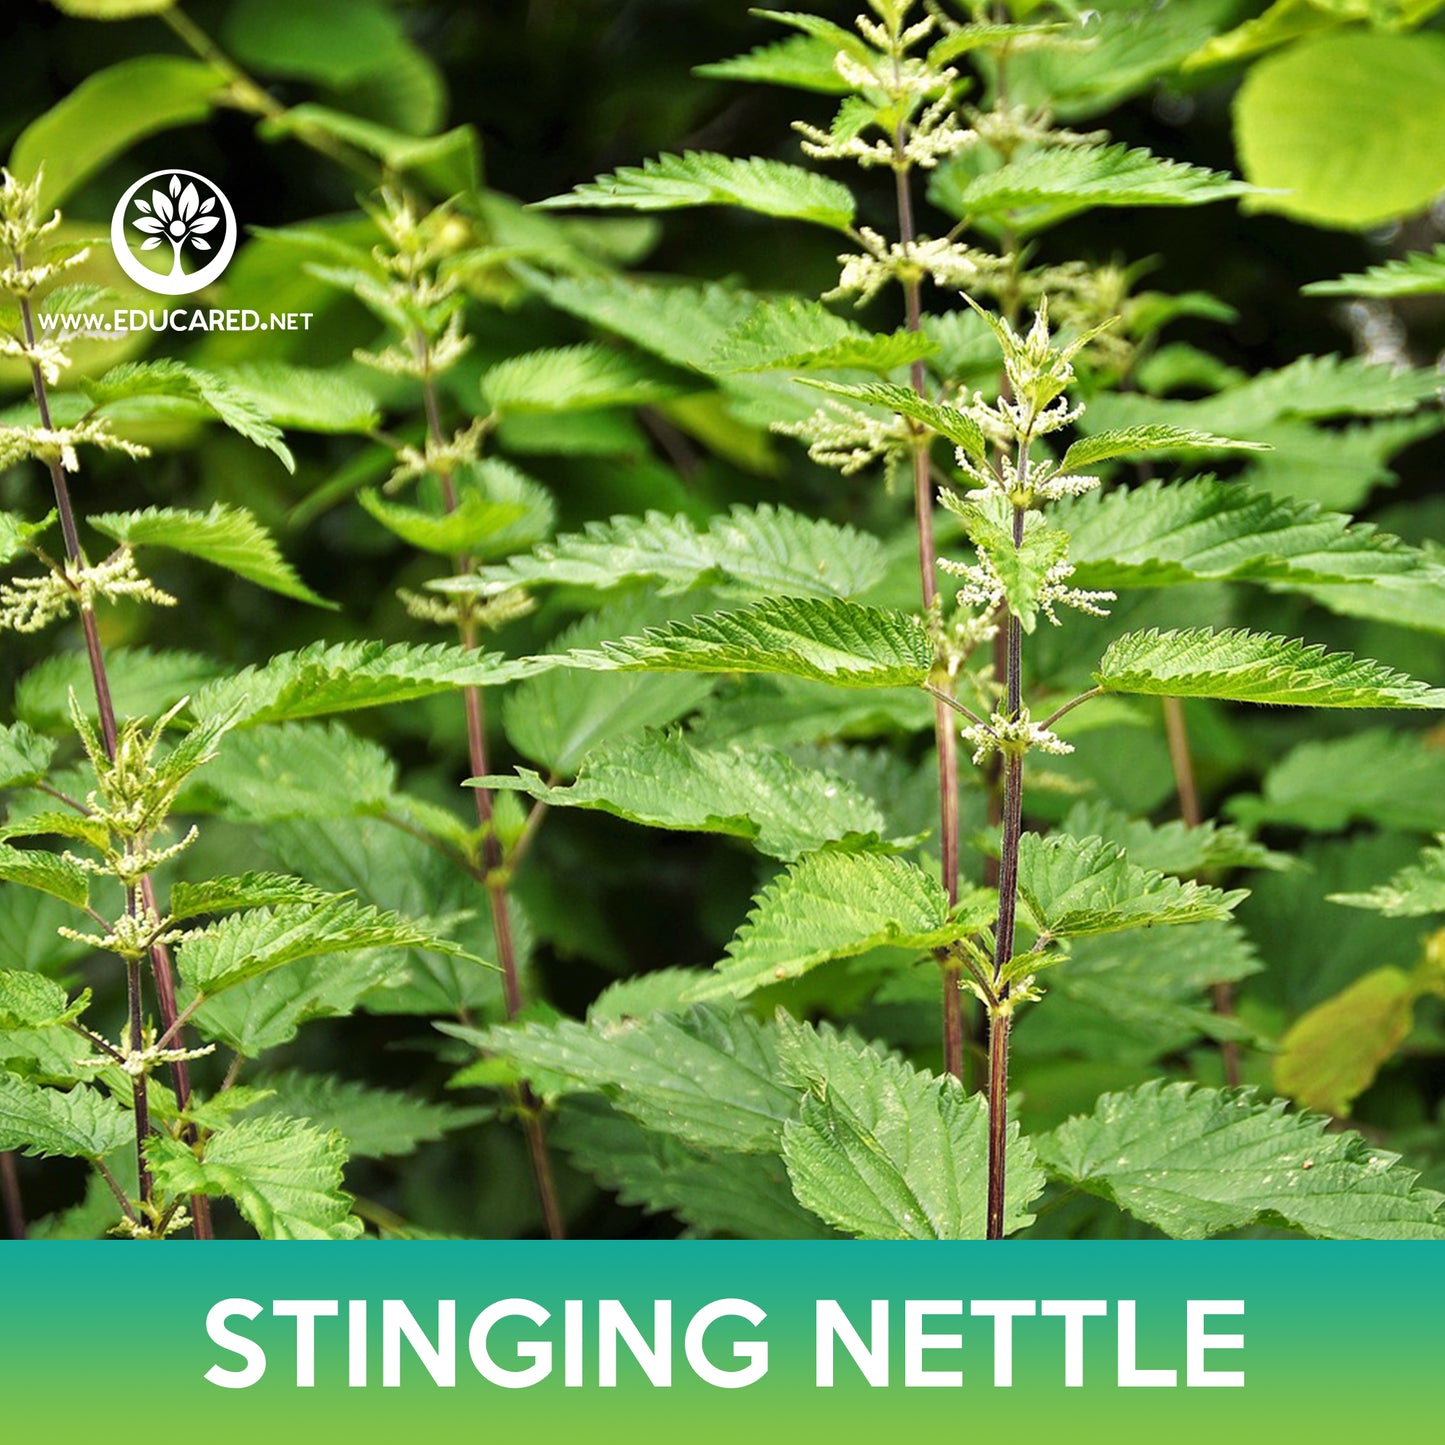 Stinging Nettle Seed, Urtica dioica